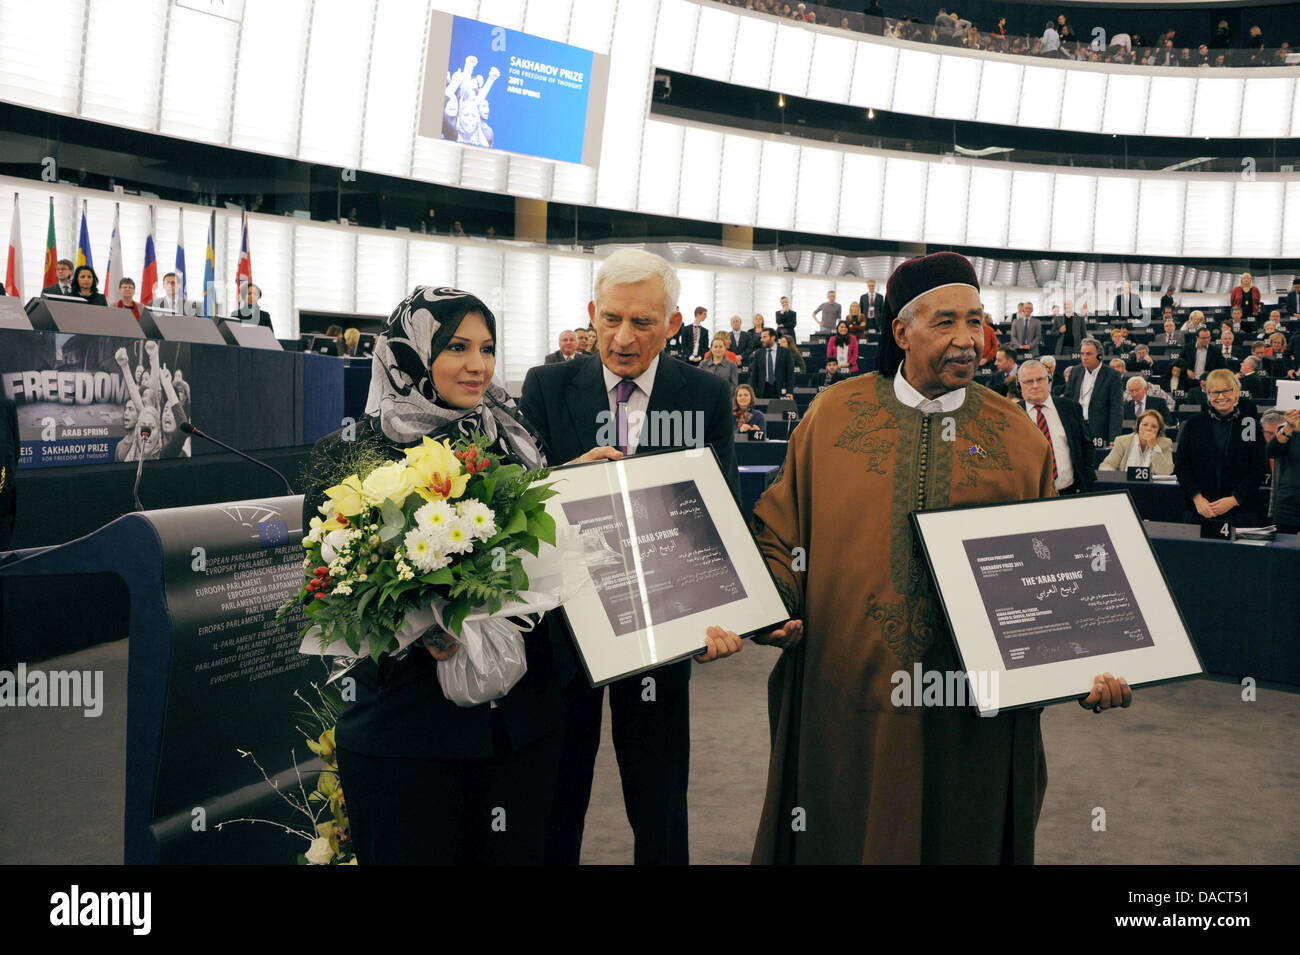 European Parliament President Jerzy Buzek (C) hands over the certificates to Asmaa Mahfouz (L) and Ahmed Al-Zubair Ahmed Al-Sanusi (R), two of the five Sakharov award winners at the European Parliament in Strasbourg, France, 14 December 2011.The Awards of the 2011 Sakharov Prize for freedom of thought was awarded to five Arab Spring activists for the historic changes in the Arab wo Stock Photo